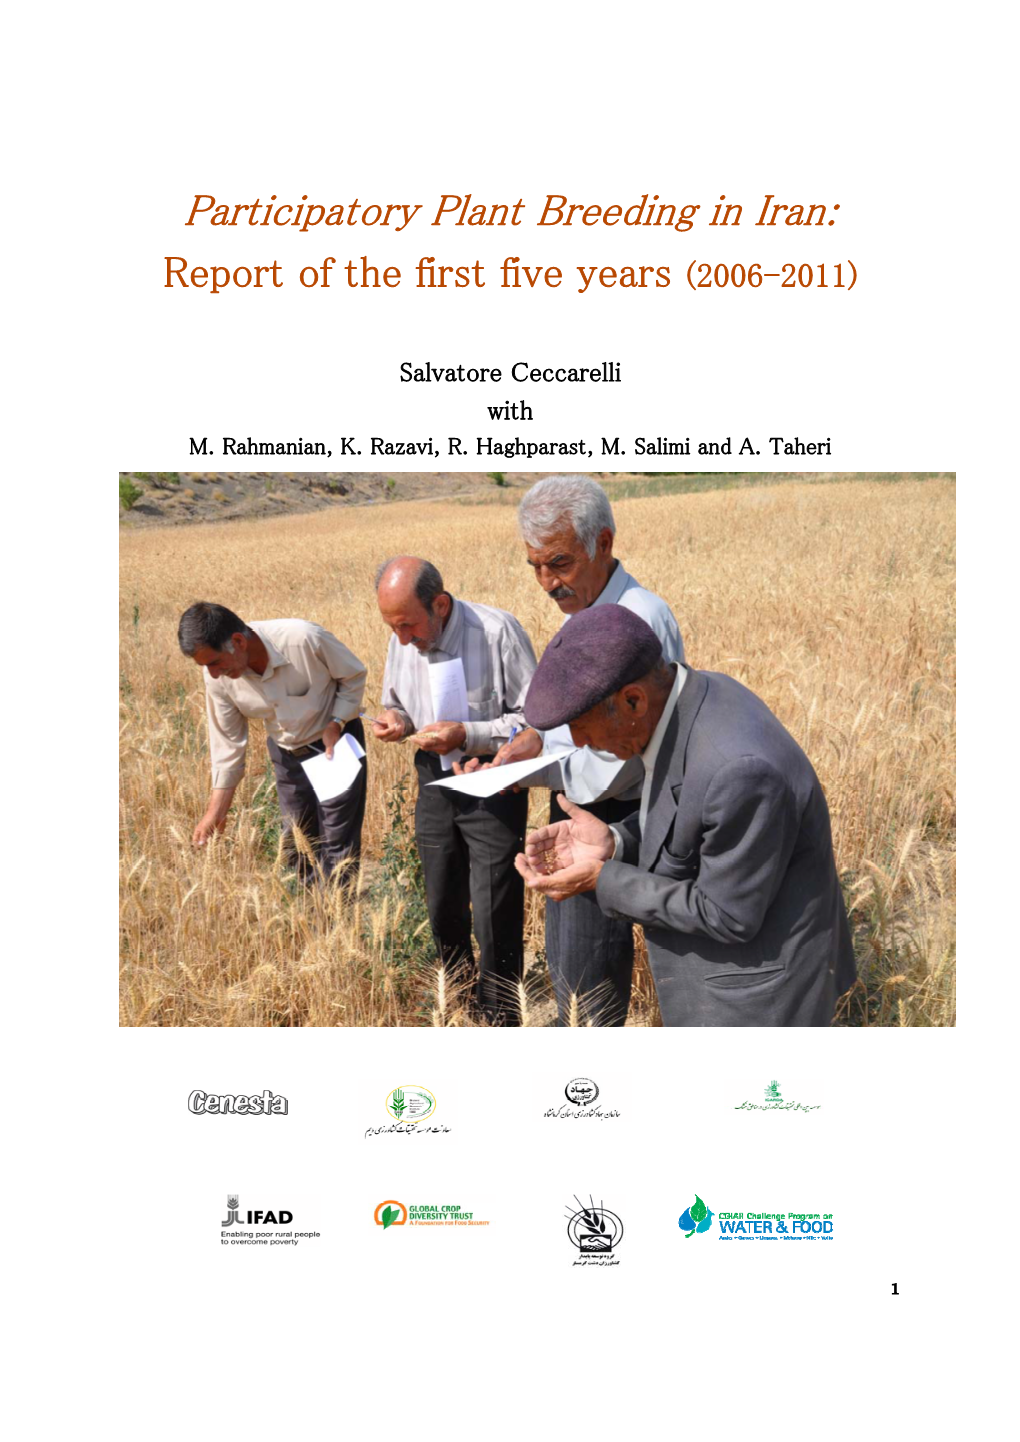 Participatory Plant Breeding in Iran: Report of the First Five Years (2006-2011)